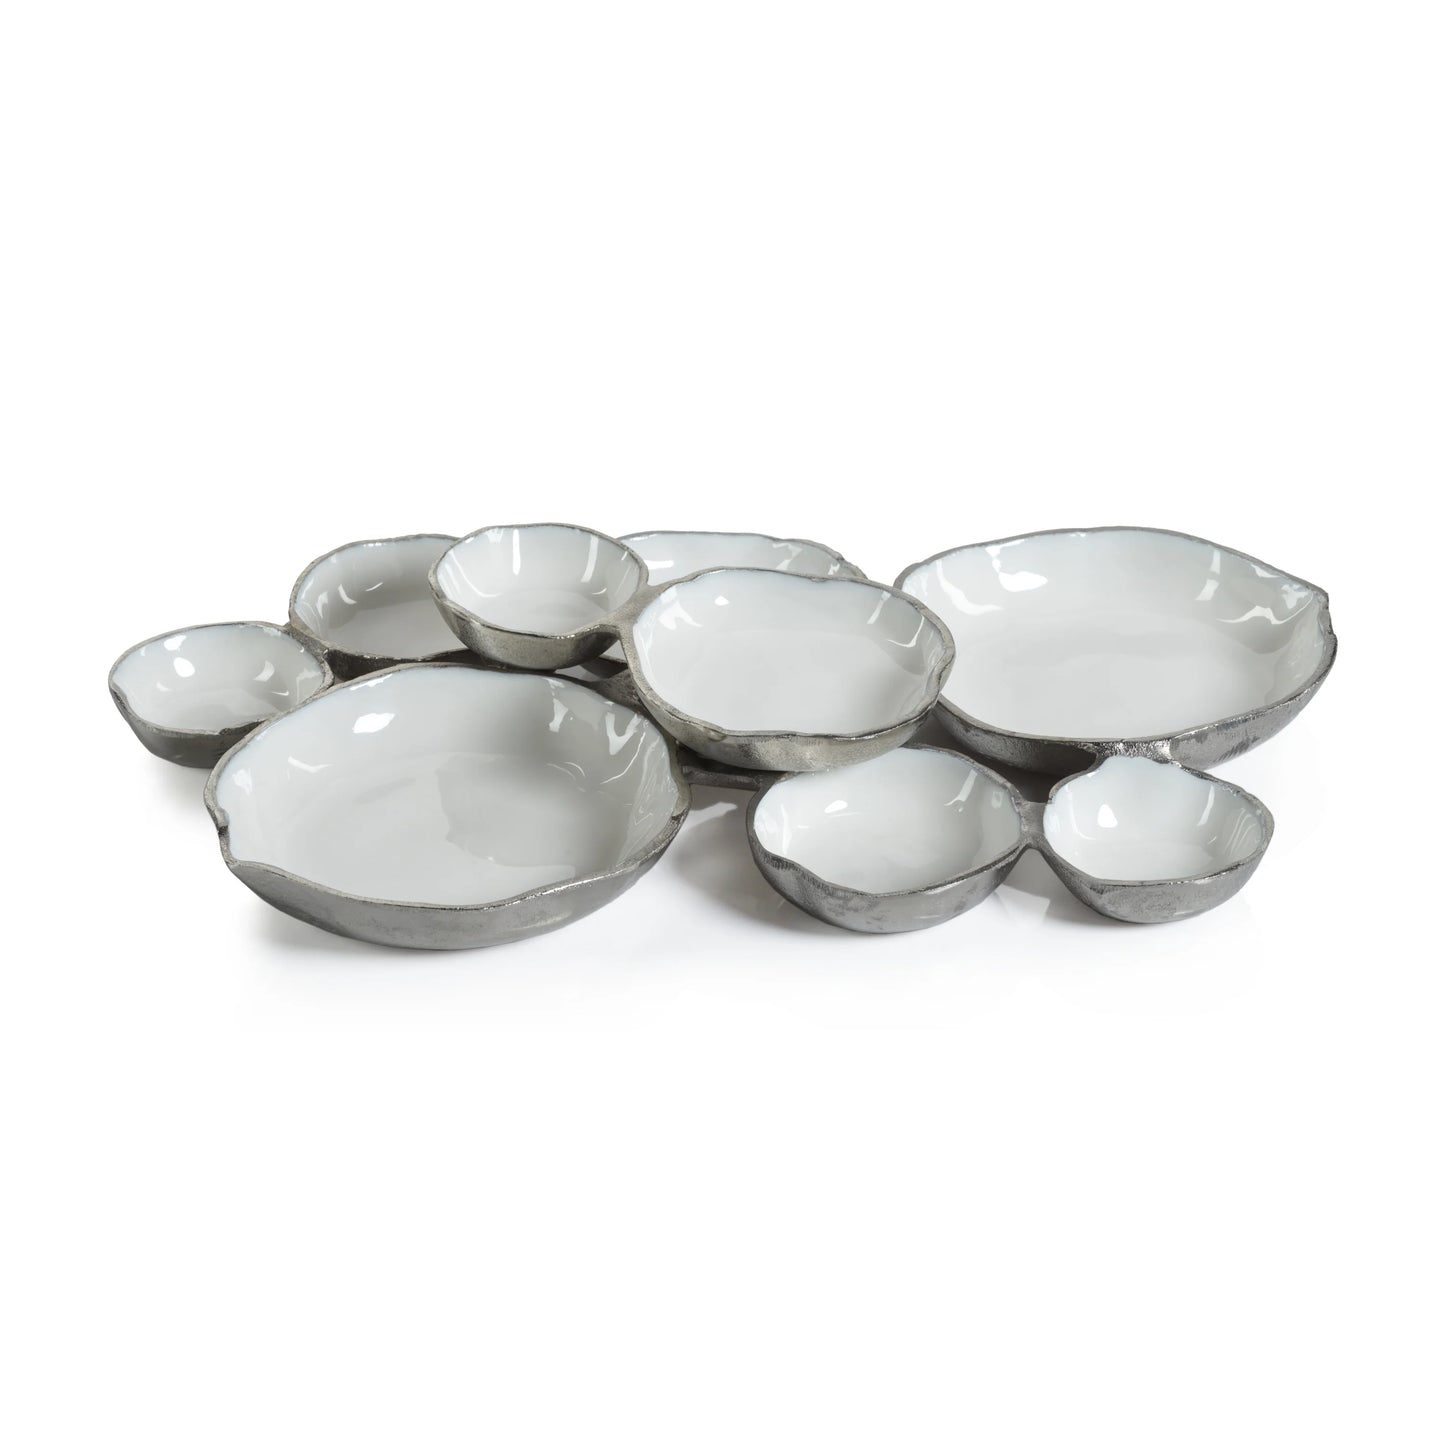 Nickel and White Cluster Bowls Charcuterie Medium